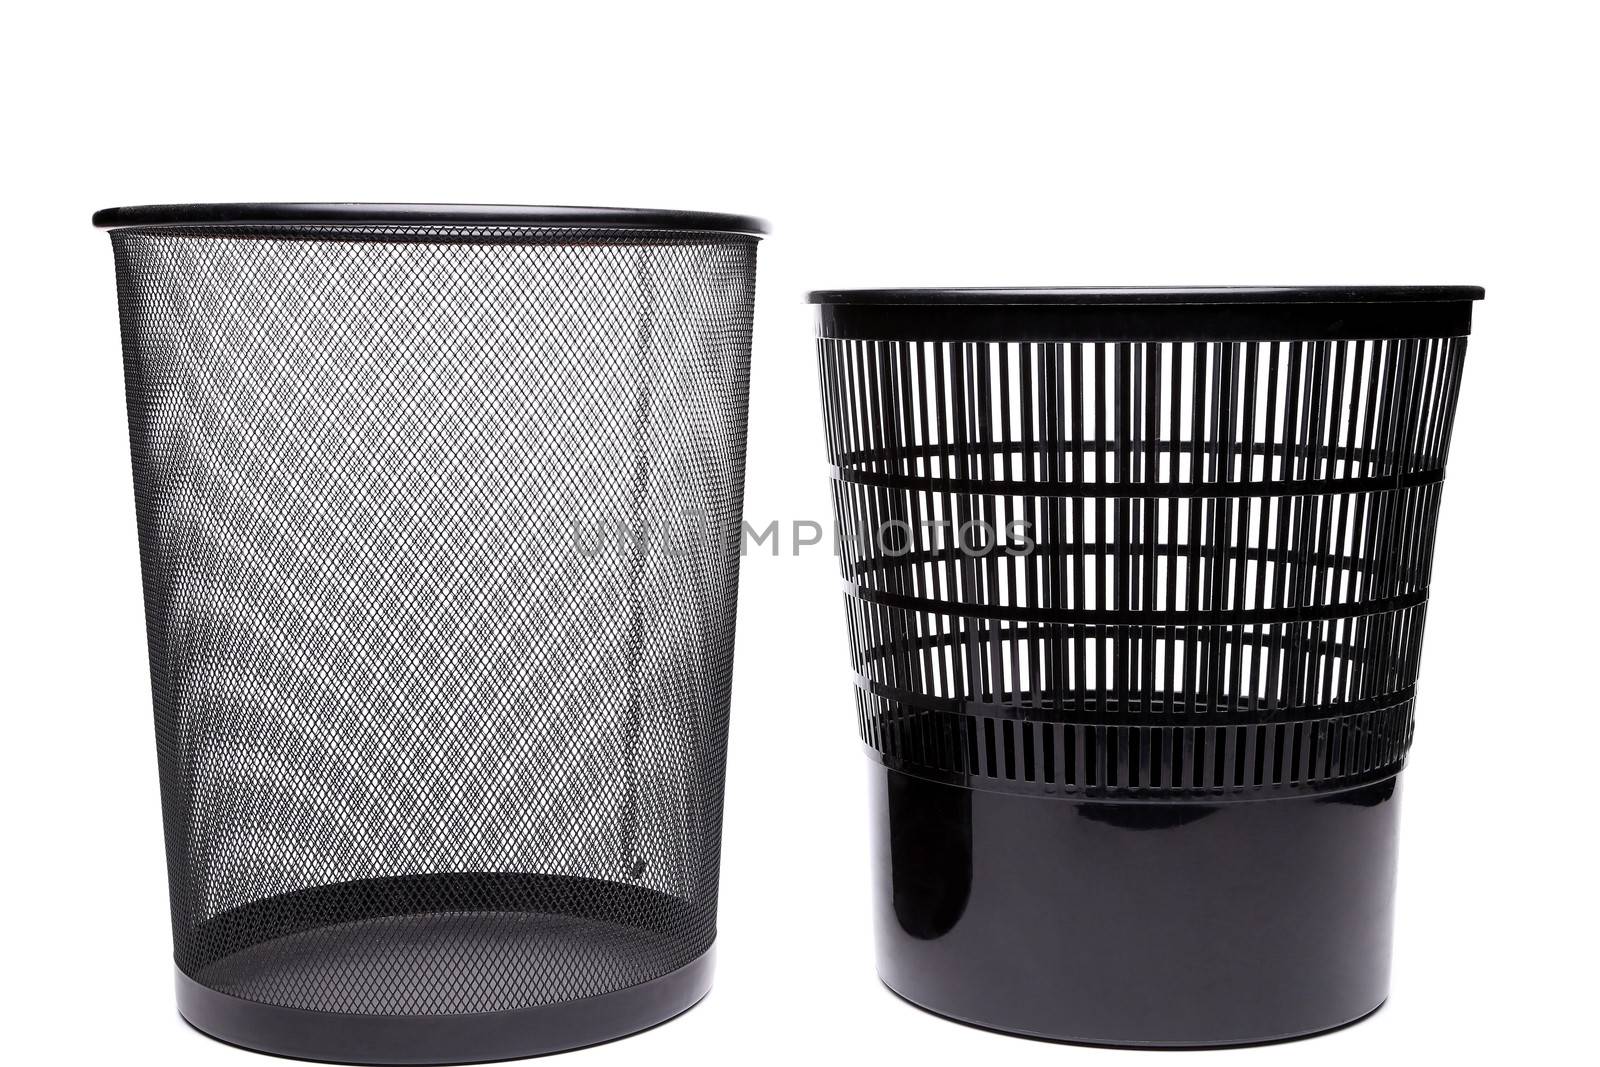 Metal and plastic trash cans on white background